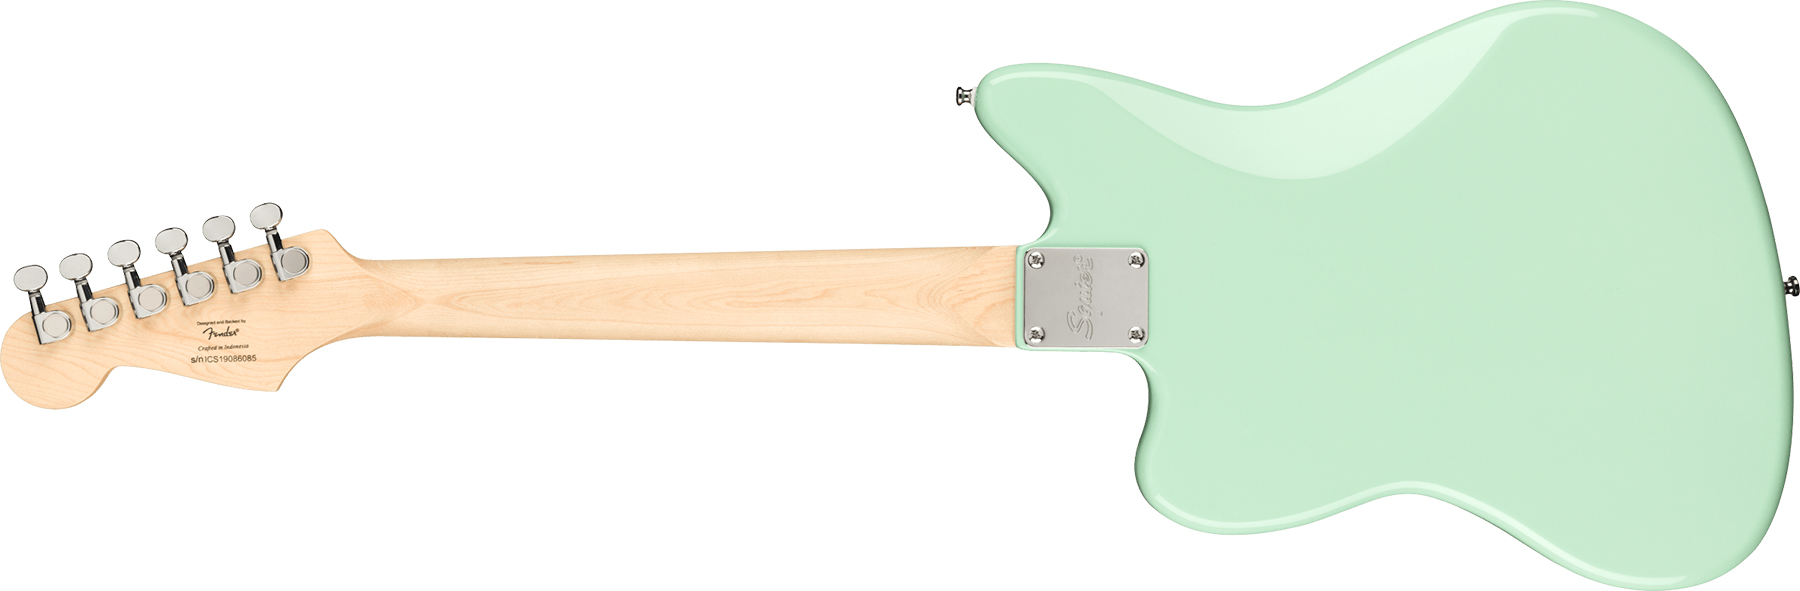 Squier Mini Jazzmaster Bullet Hh Ht Mn - Surf Green - Electric guitar for kids - Variation 1